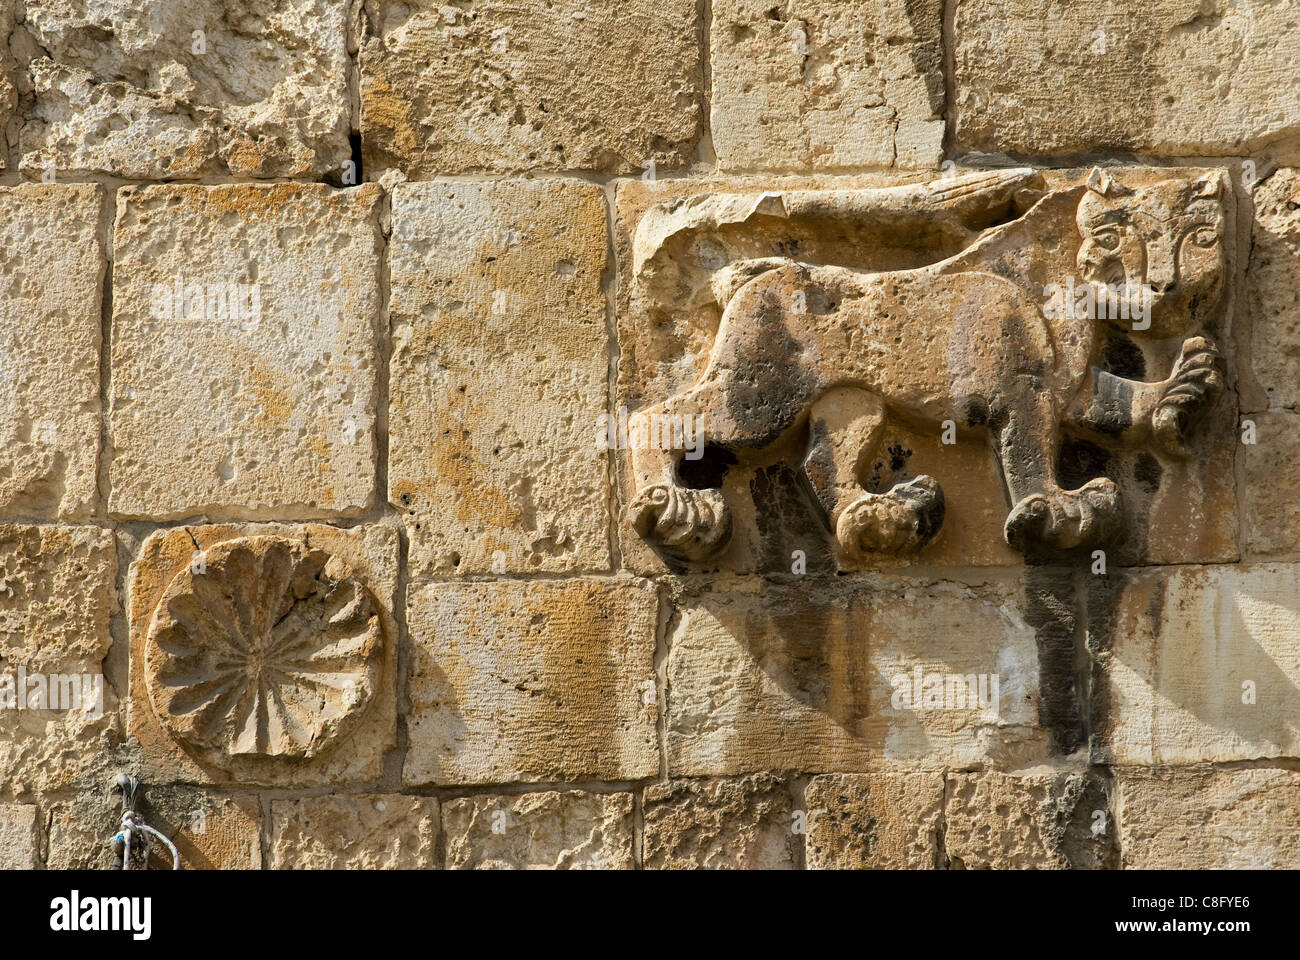 Heraldic emblem of Mamluk Sultan Baybars in shape of lion on the 16th century Lion's or St Stephen's Gate also Bab al-Asbat in the Ottoman wall located at the eastern edge of the Old City of Jerusalem Israel Stock Photo